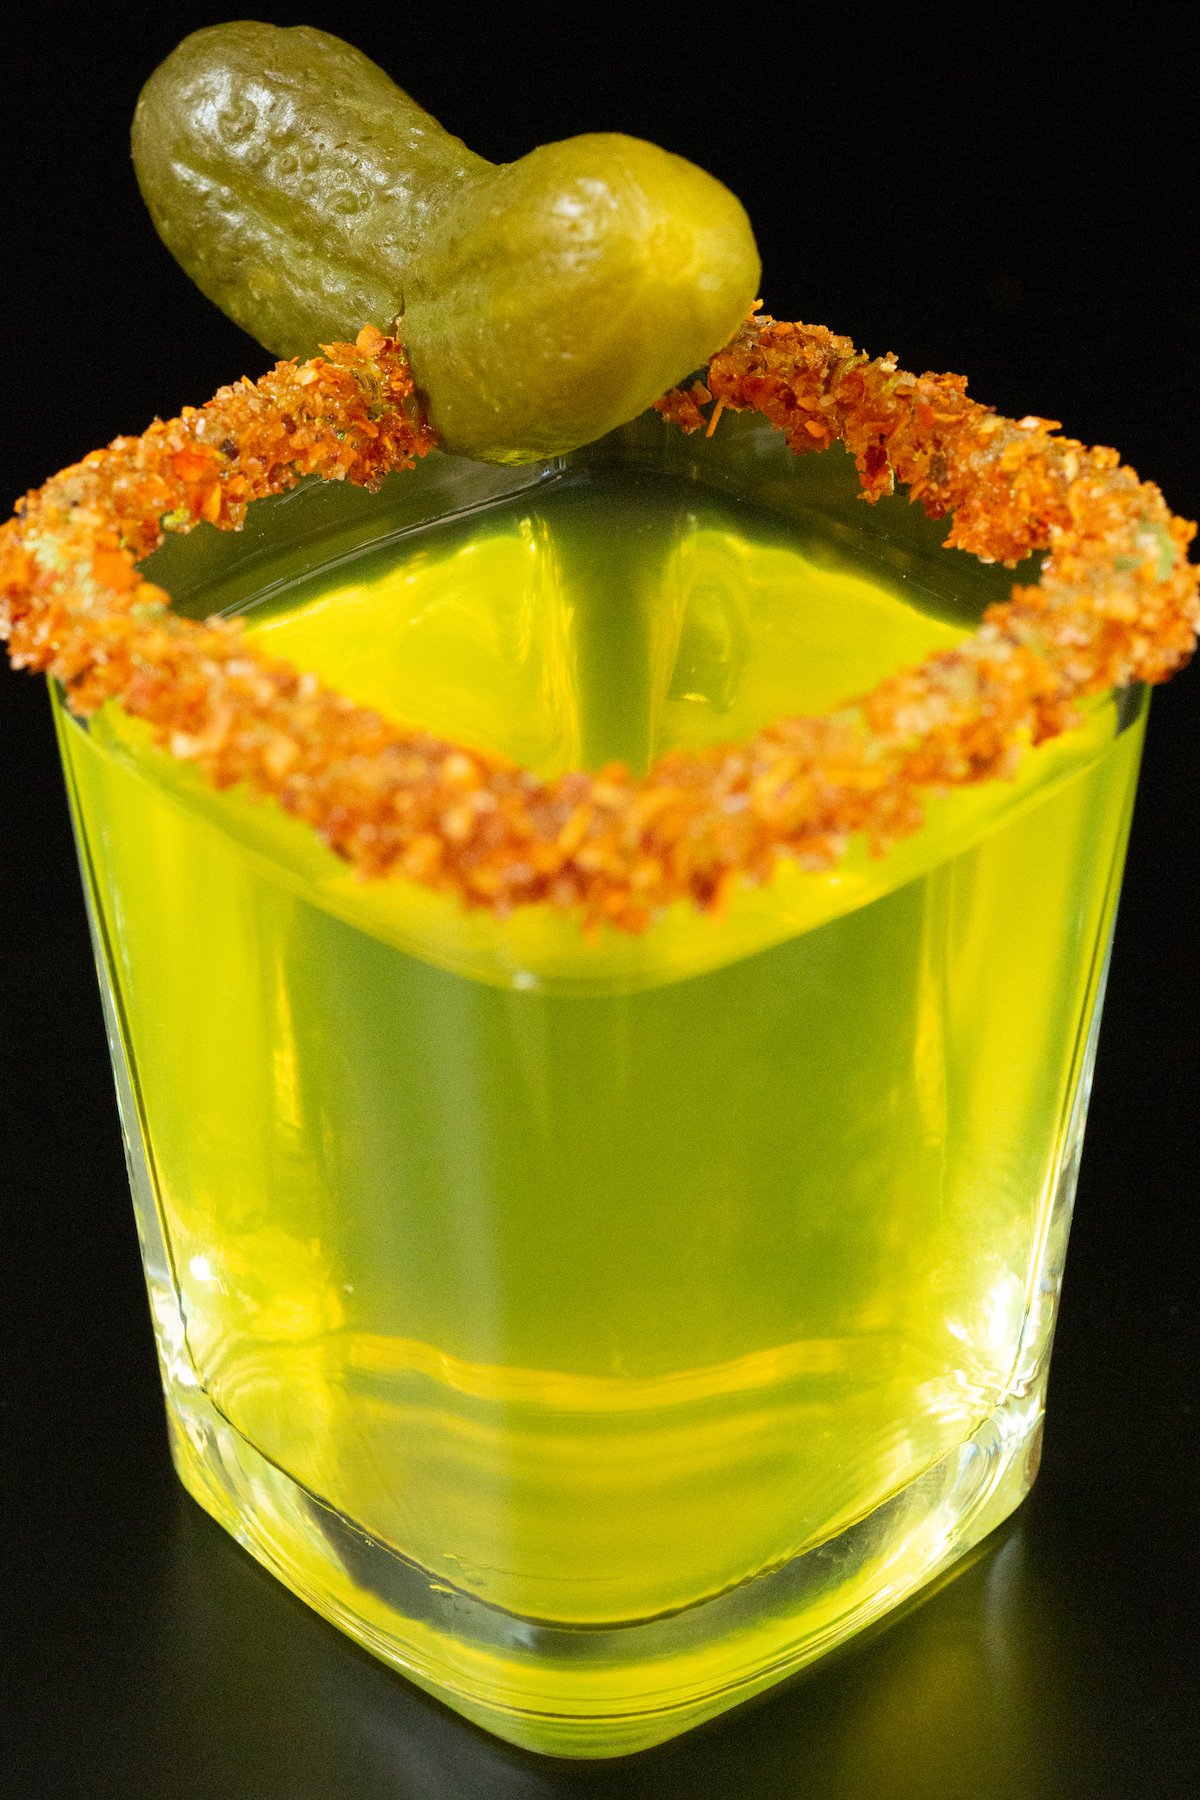 A single square shot glass filled with a neon green pickle shot. The rim has been dipped in red Tajin chili powder and a baby pickle is added as a garnish.